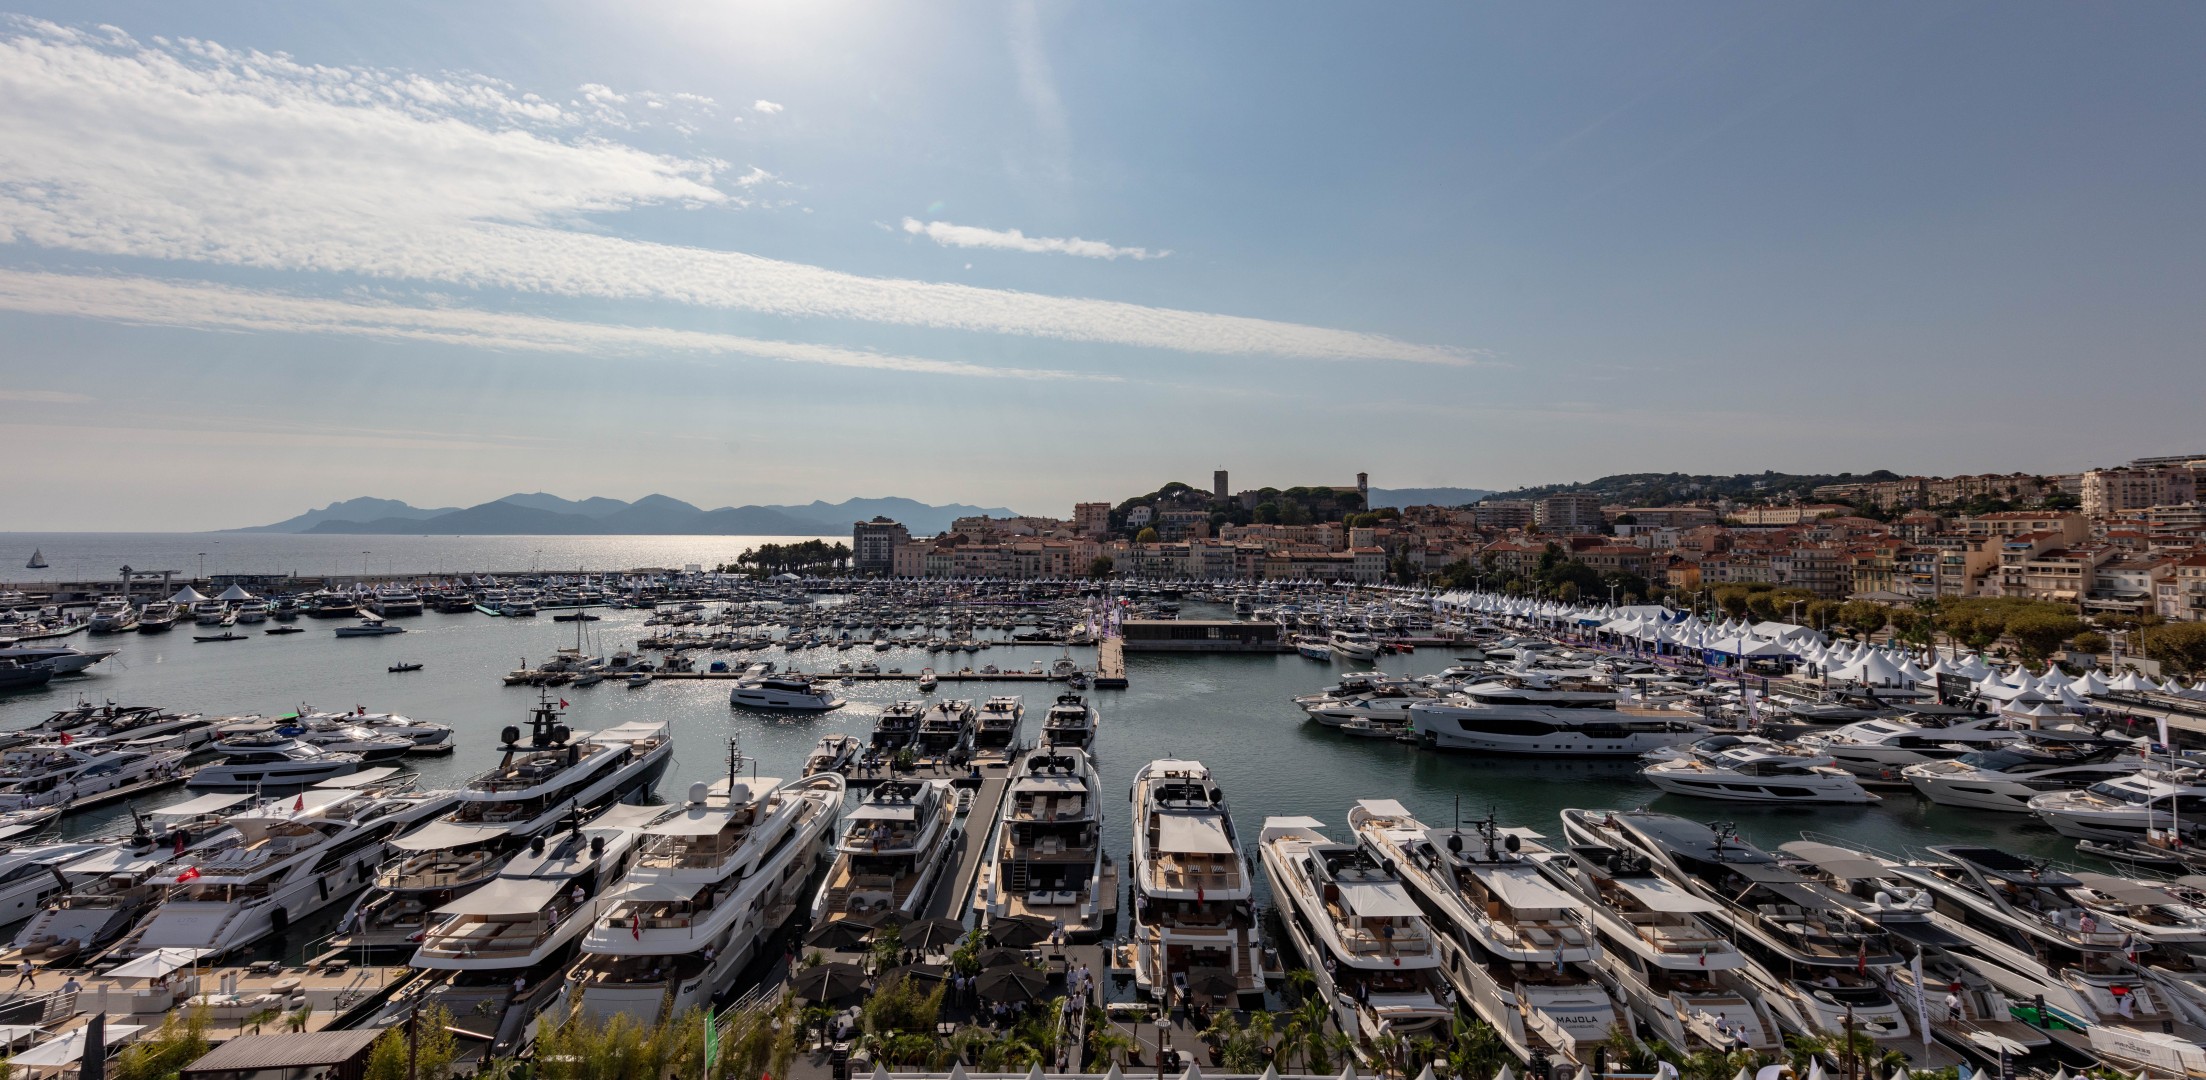 CMC Marine attends the Cannes Yachting Festival 2022 in grand style